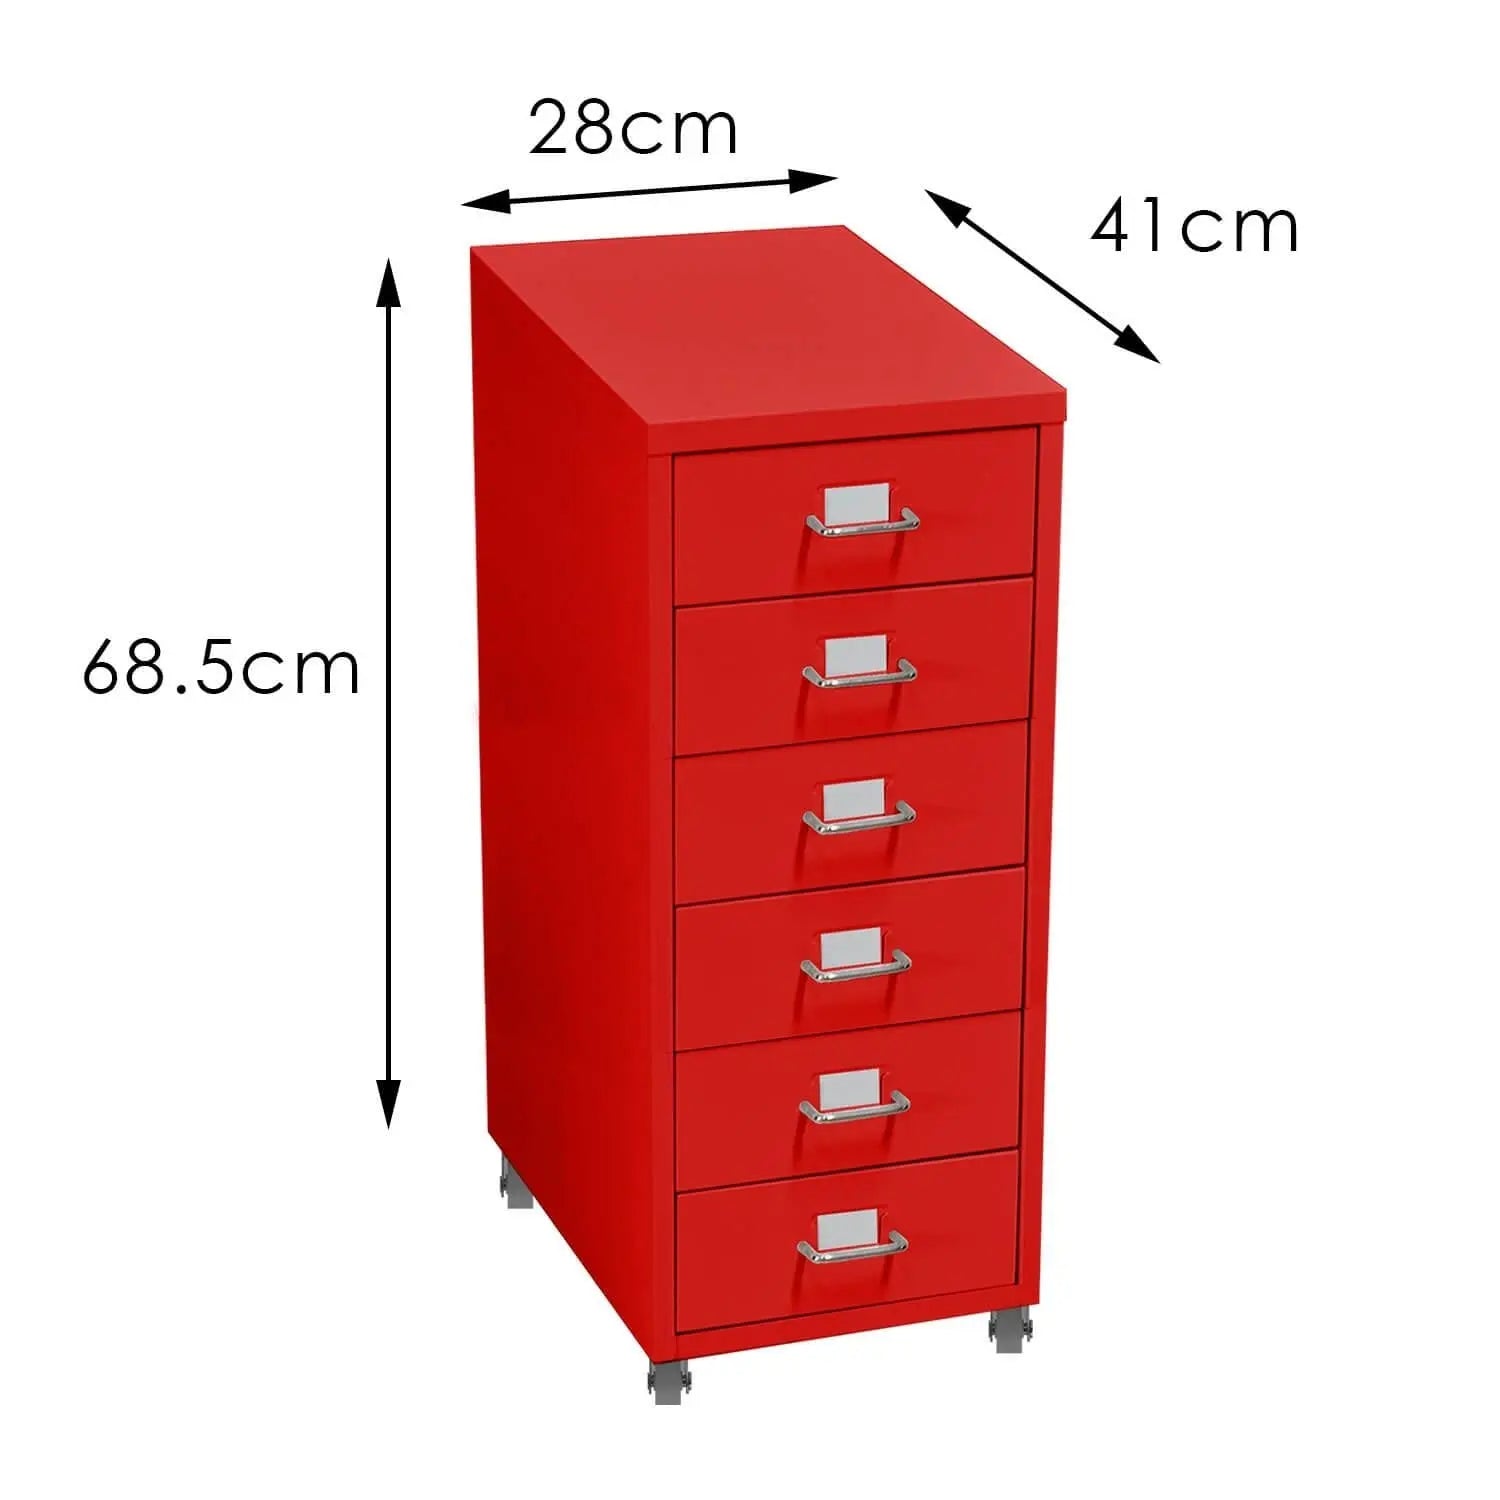 6 Tiers Steel Orgainer Metal File Cabinet With Drawers Office Furniture Red Deals499